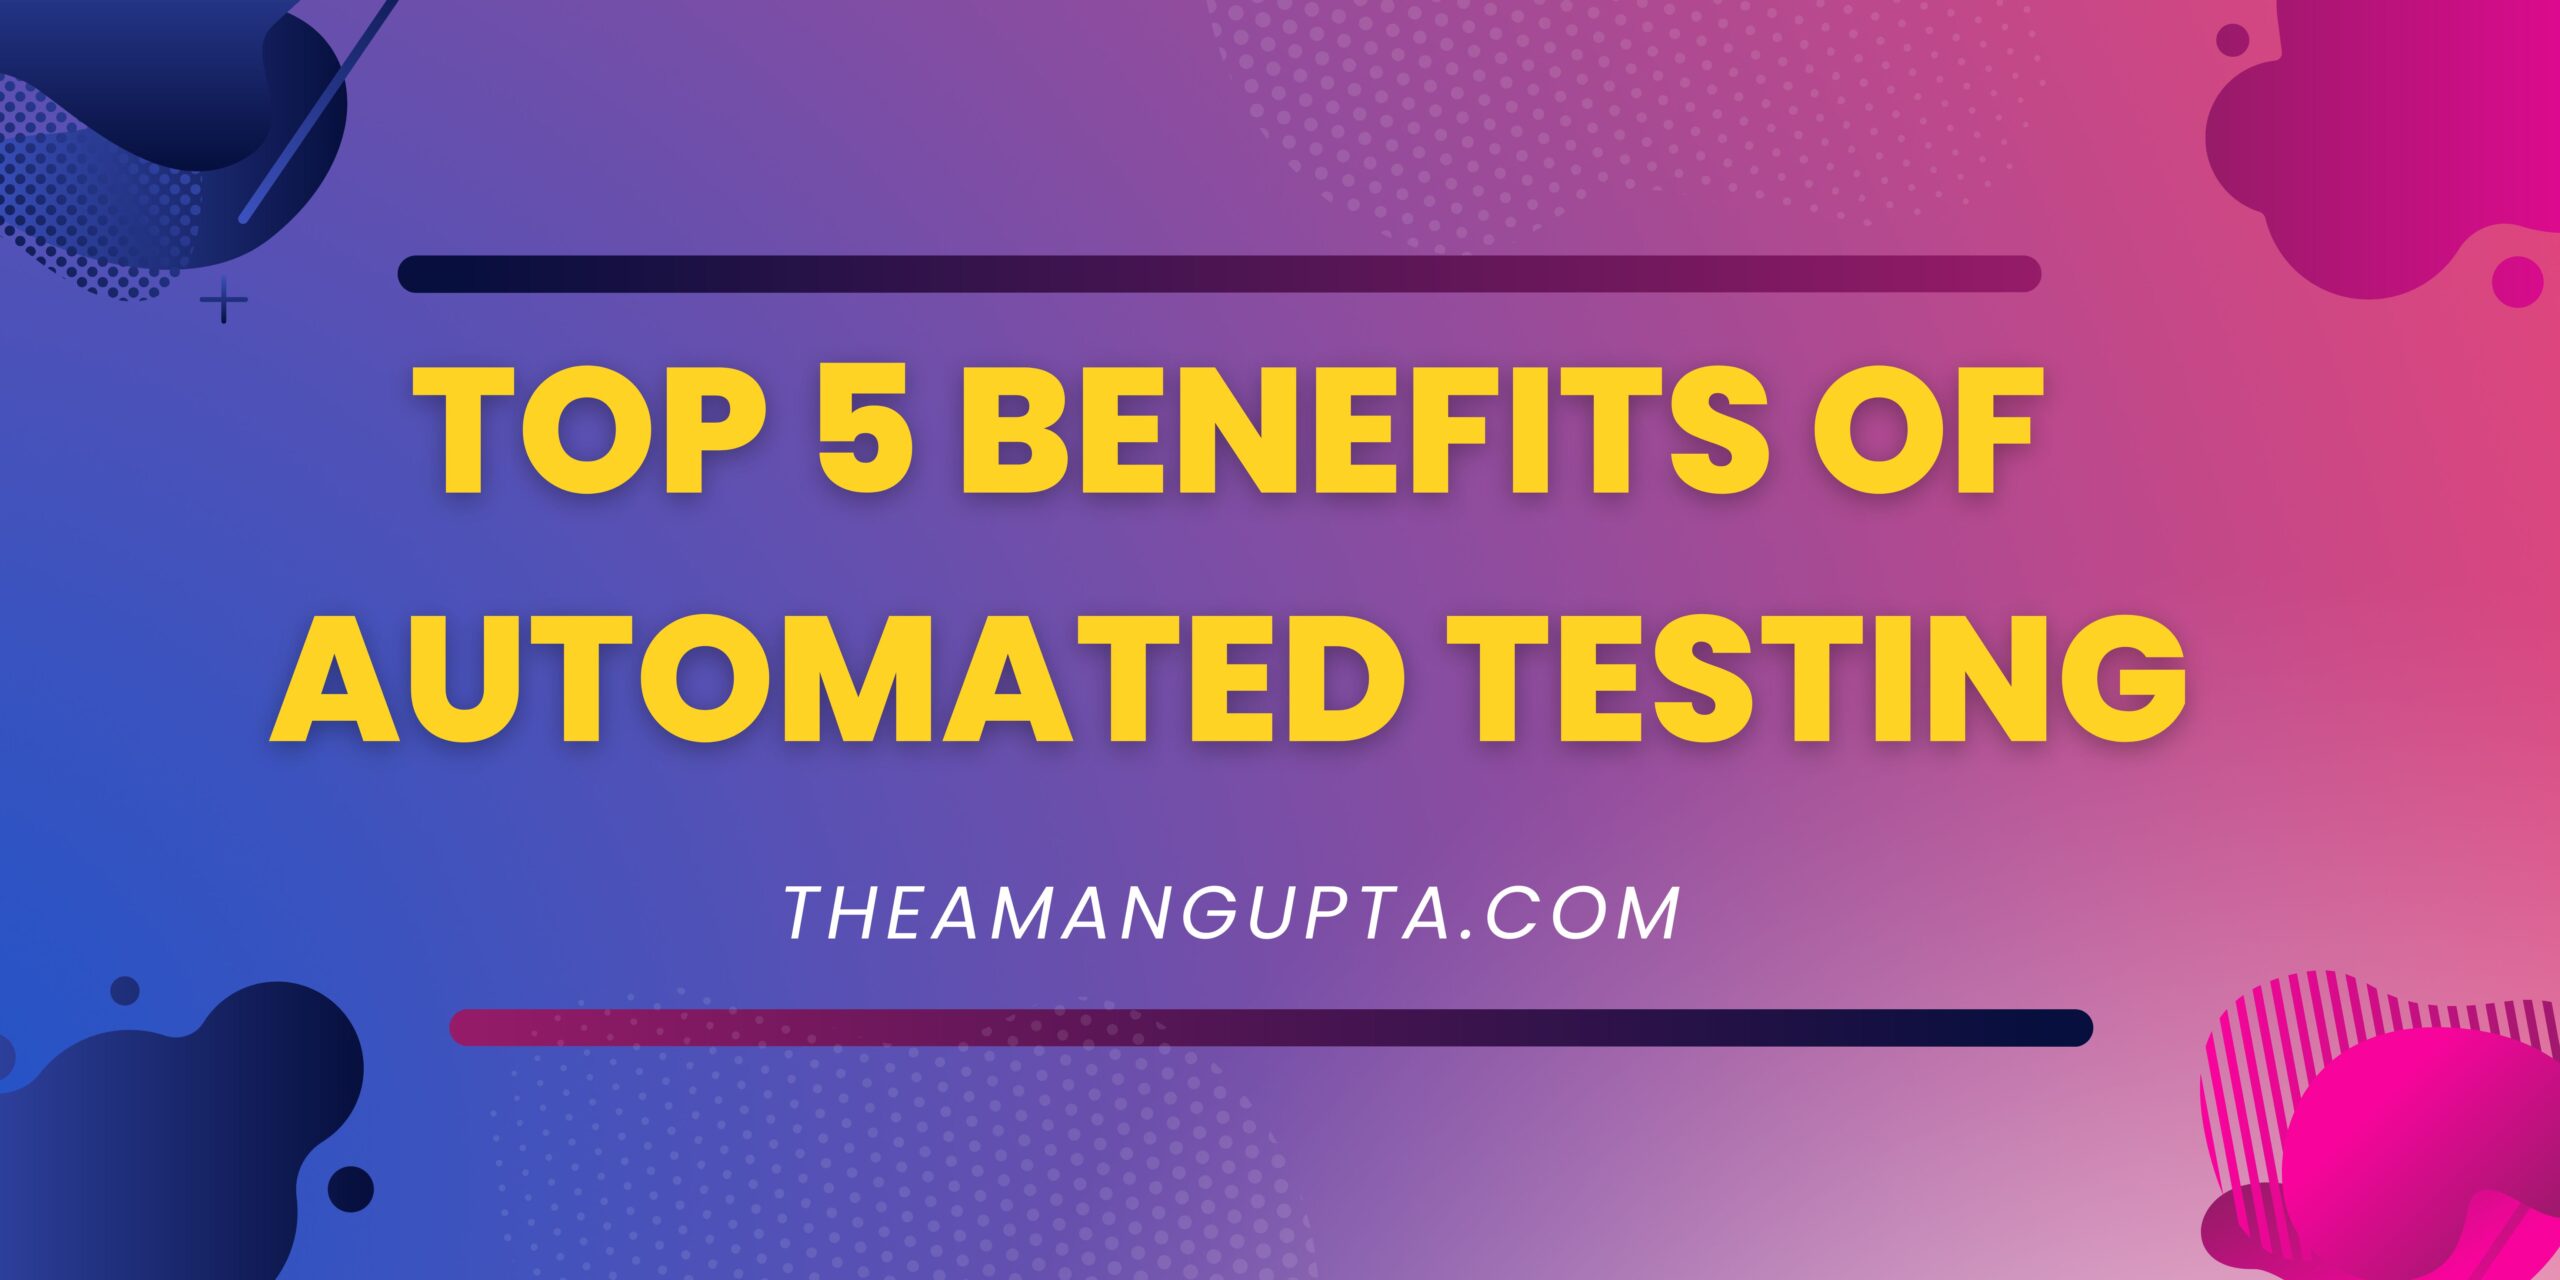 Top 5 Benefits of Automated Testing|Top 5 Benefits of Automated Testing|Theamangupta|Theamangupta